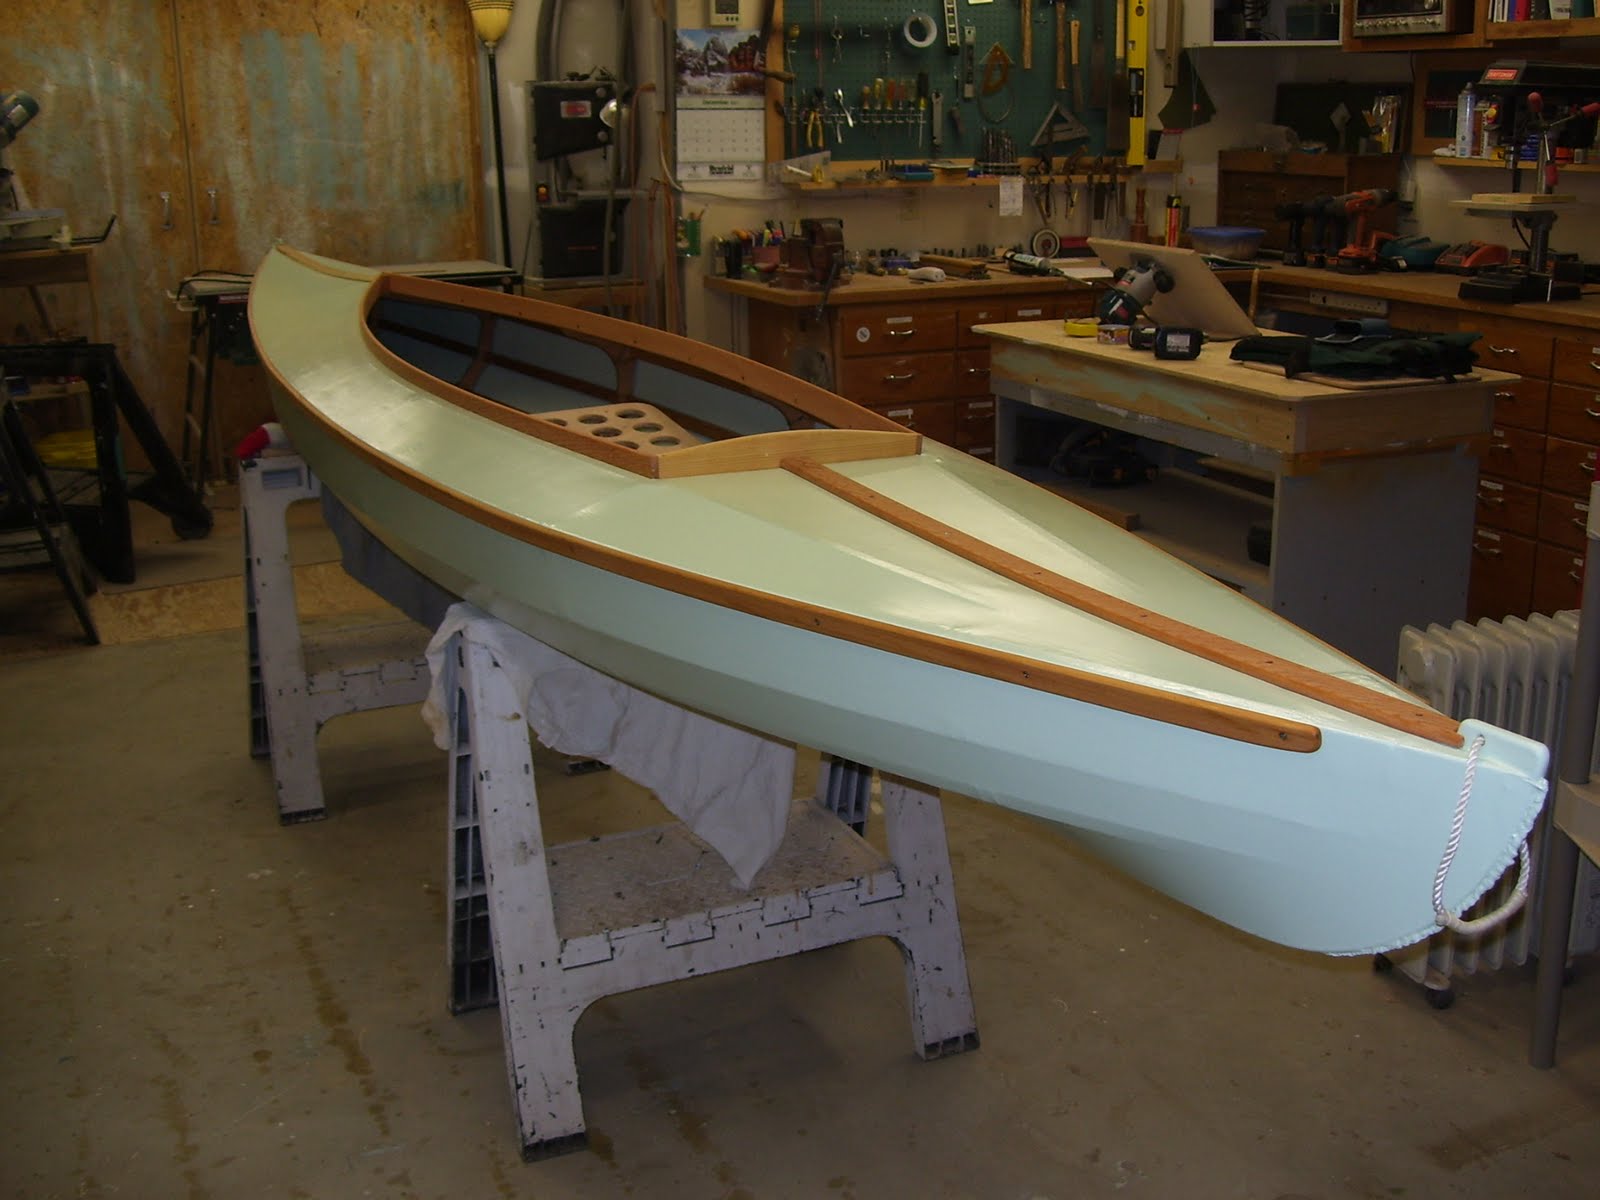 Yes! Skin-on-Frame Kayaks use Natural Products | WavesChamp